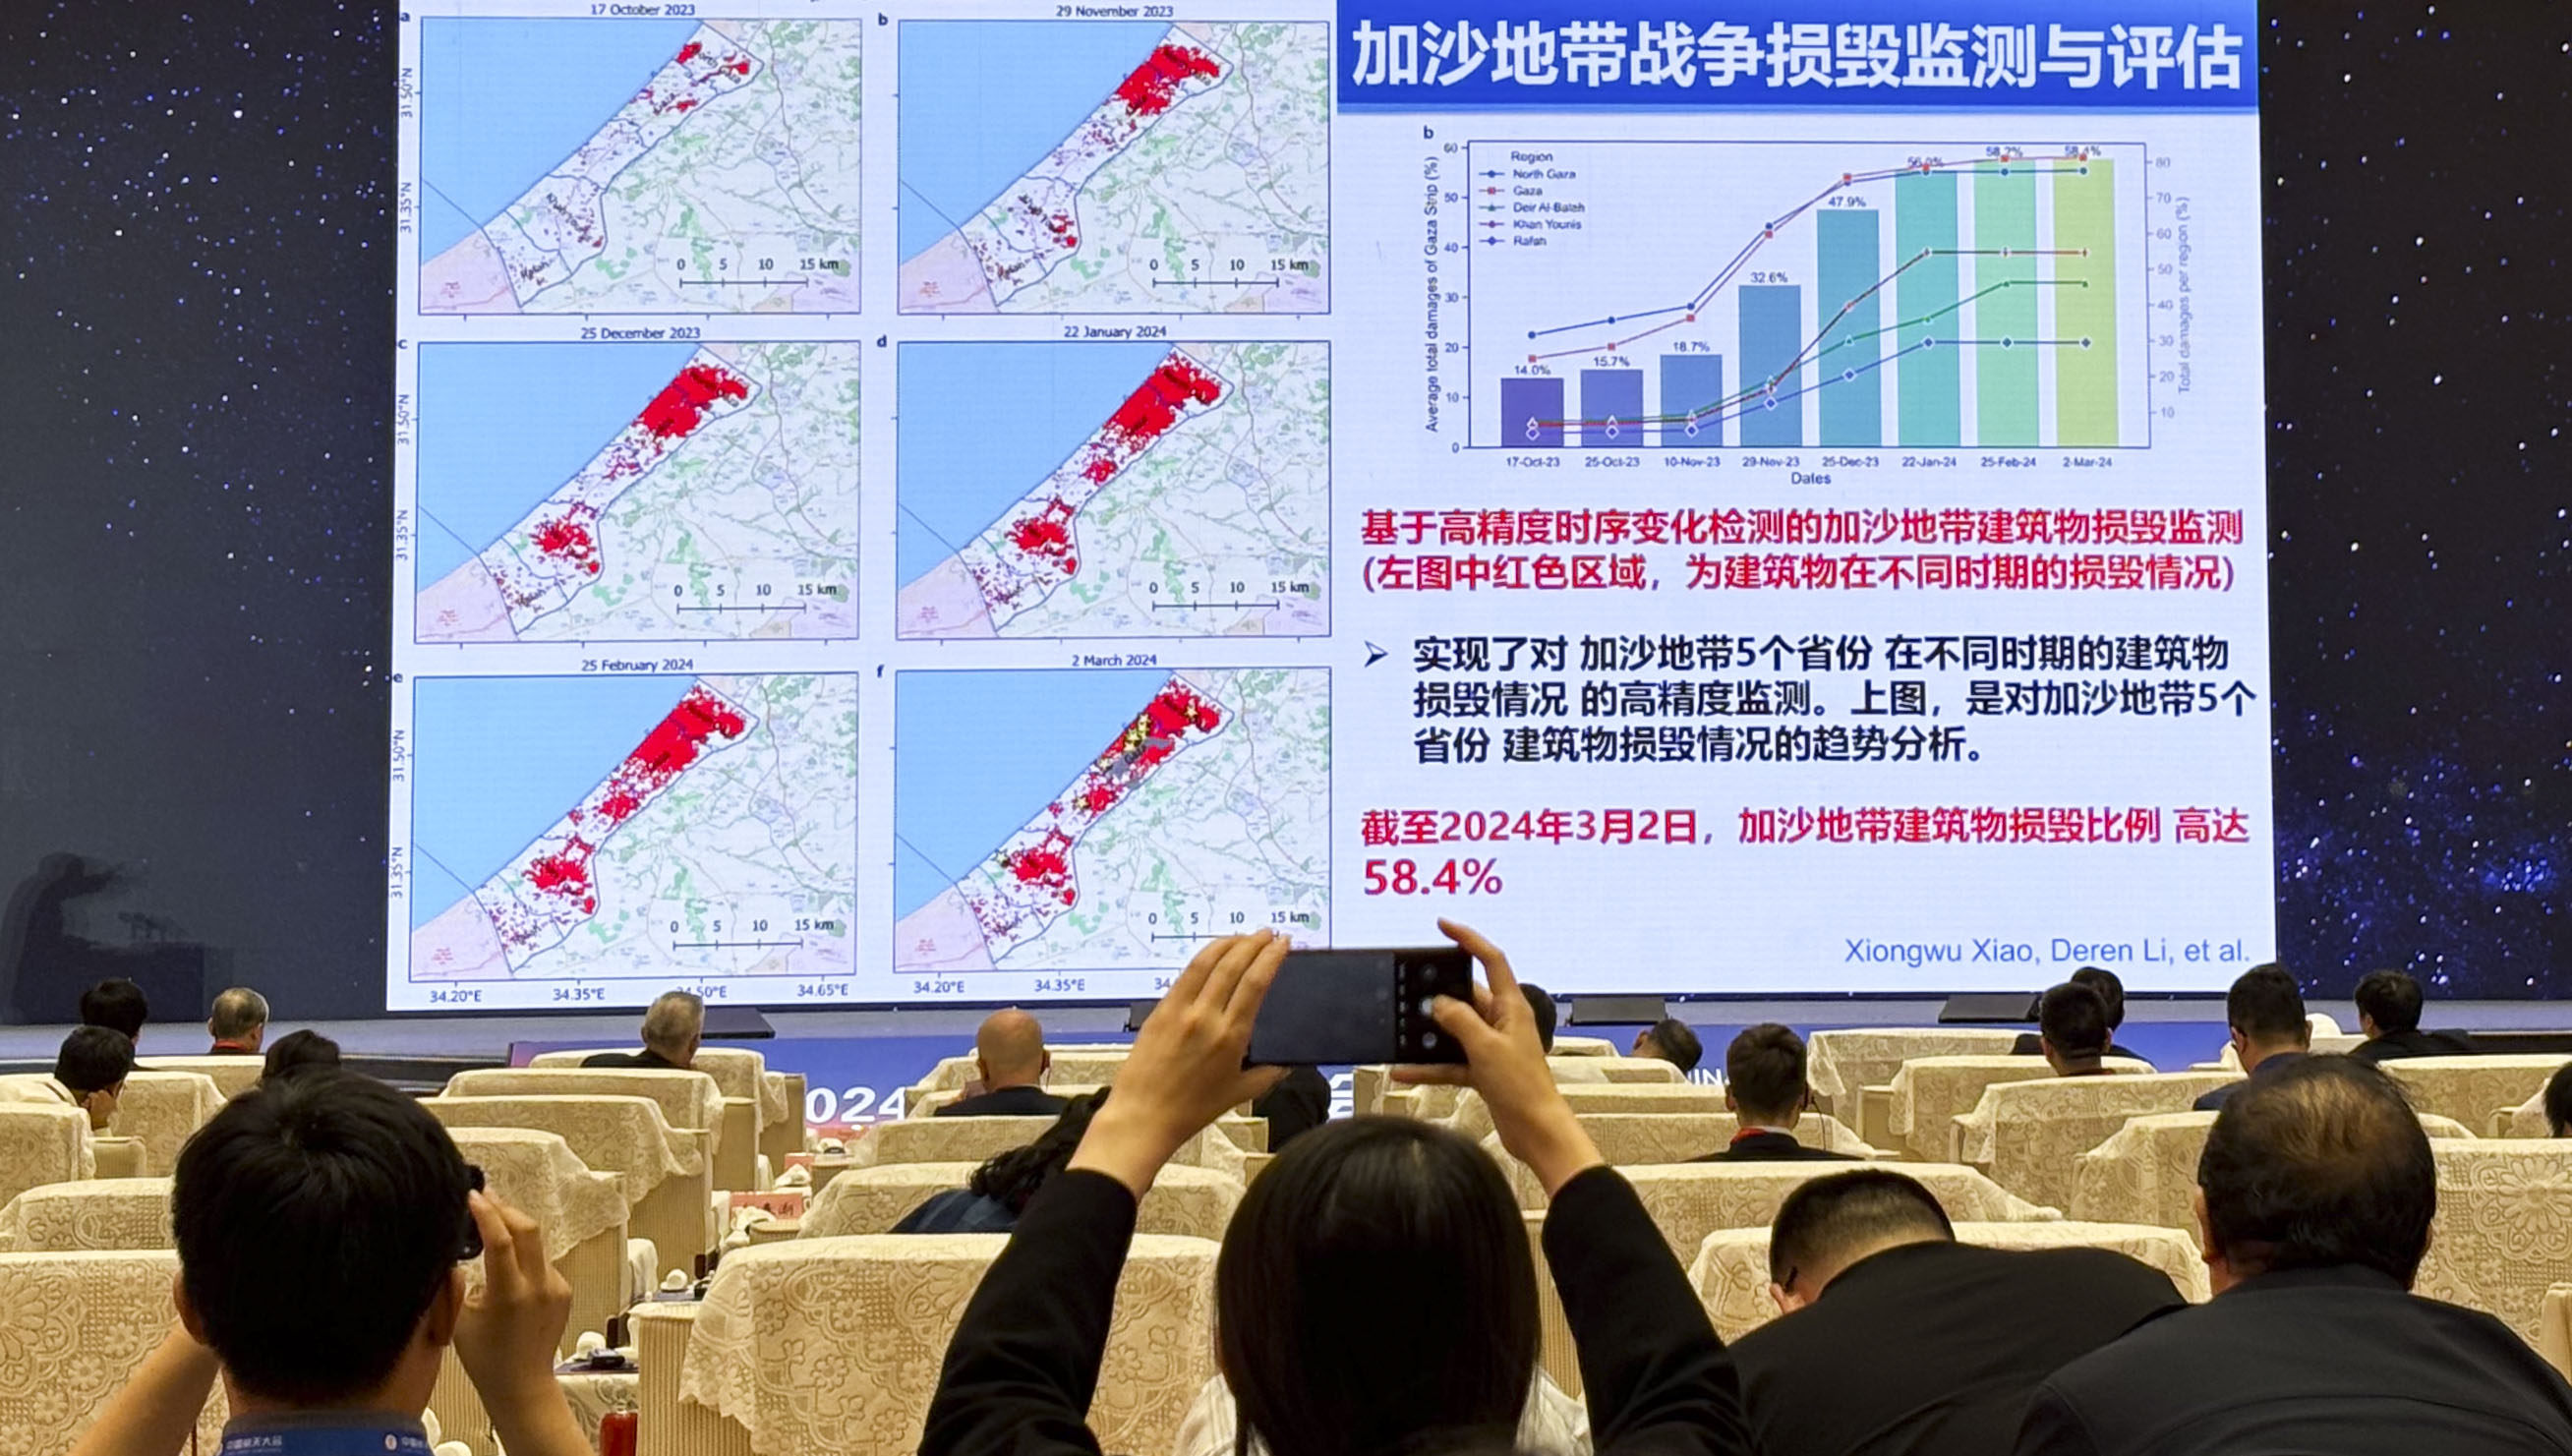 Li Deren from Wuhan University presents his teams findings on destruction in Gaza at the China Space Conference’s main on Wednesday. Photo: Handout